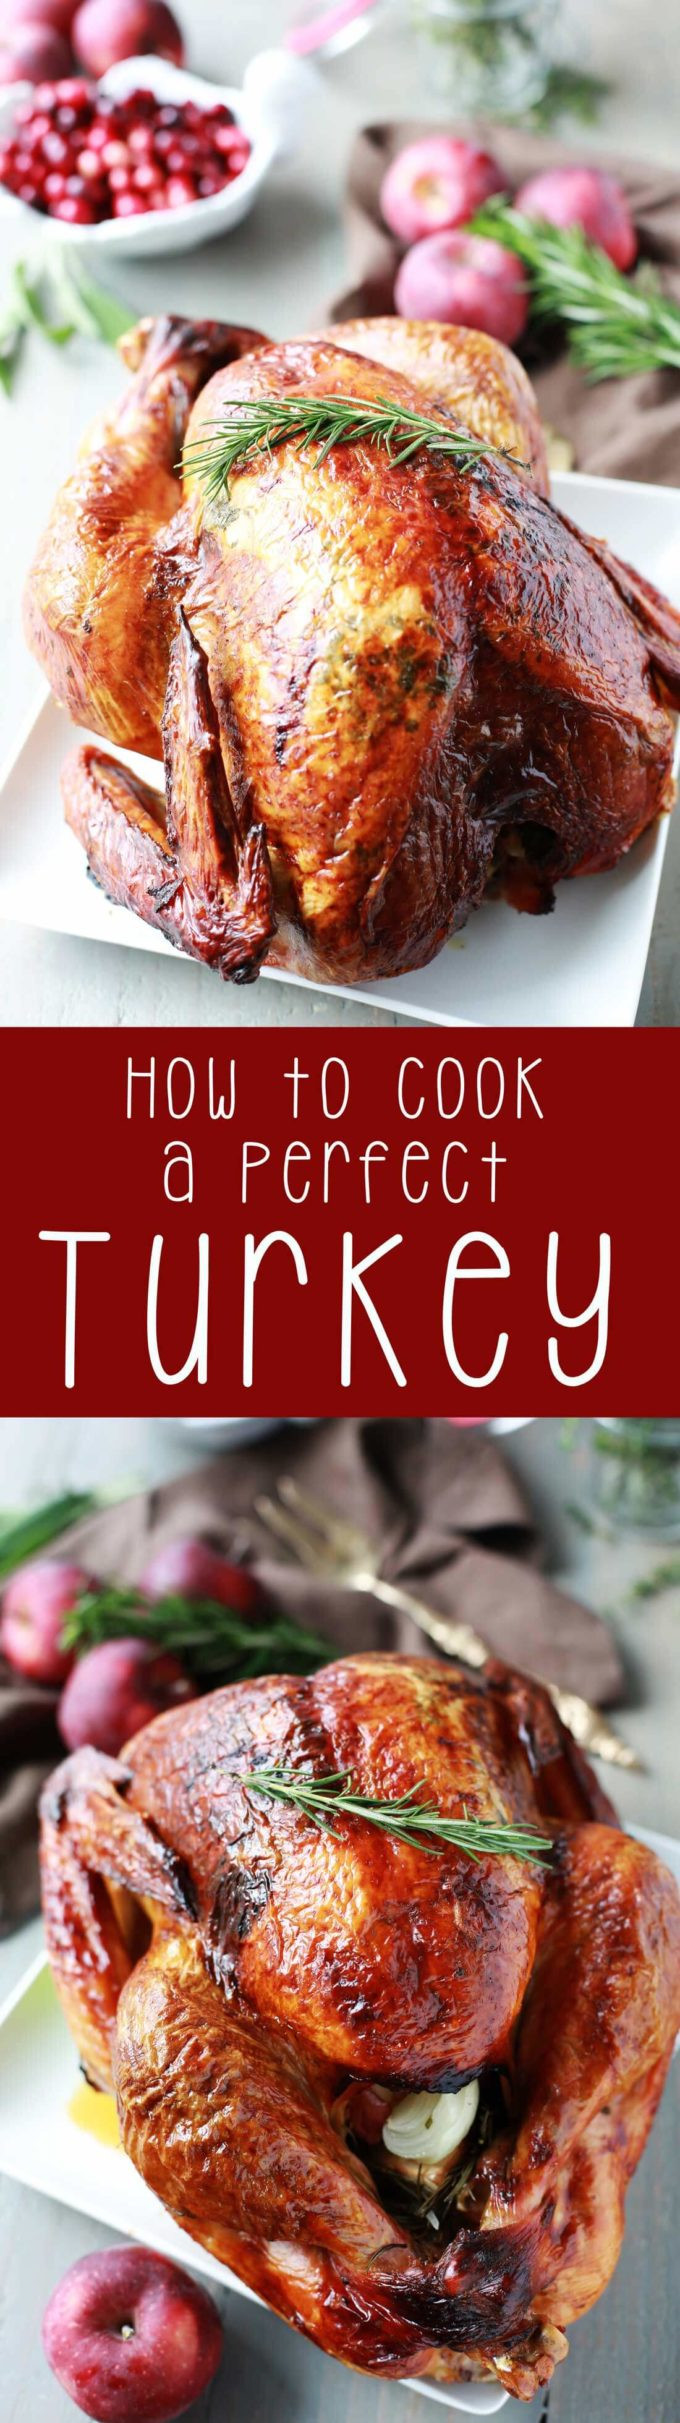 Cooking The Perfect Thanksgiving Turkey
 How to Cook a Perfect Turkey Eazy Peazy Mealz